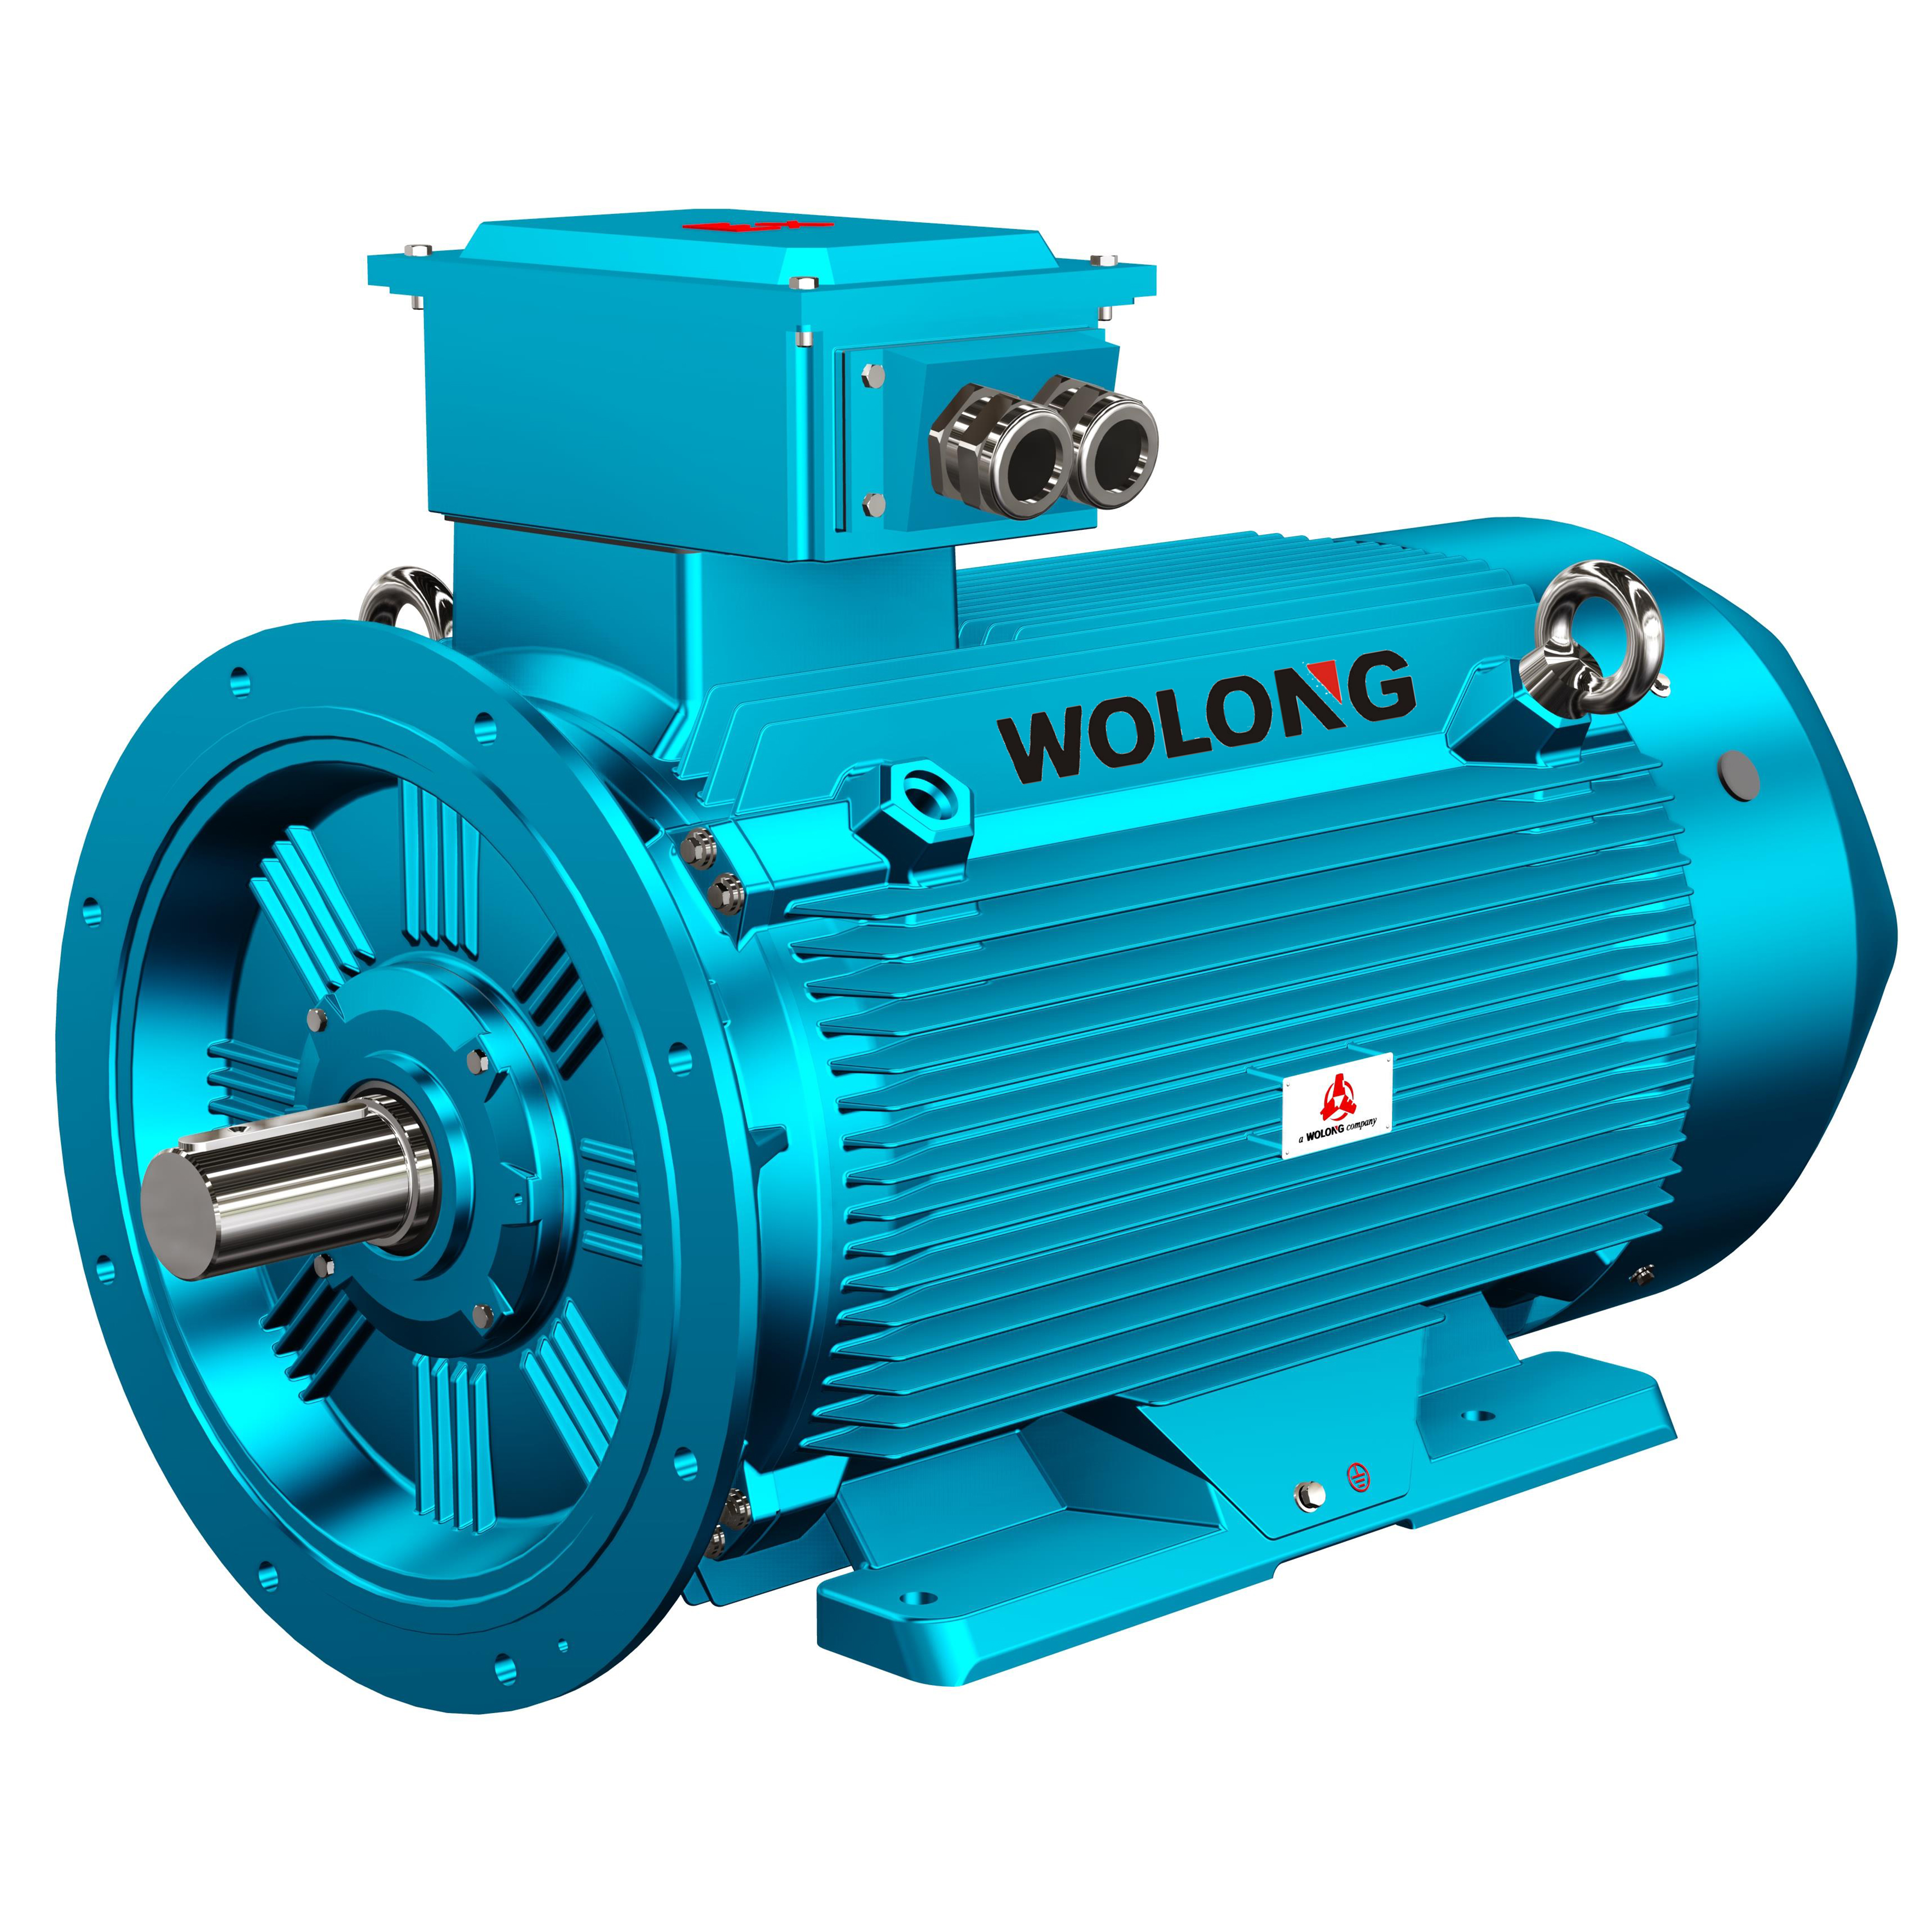 YFB4/YFB3 Low-voltage dust explosion-proof motor